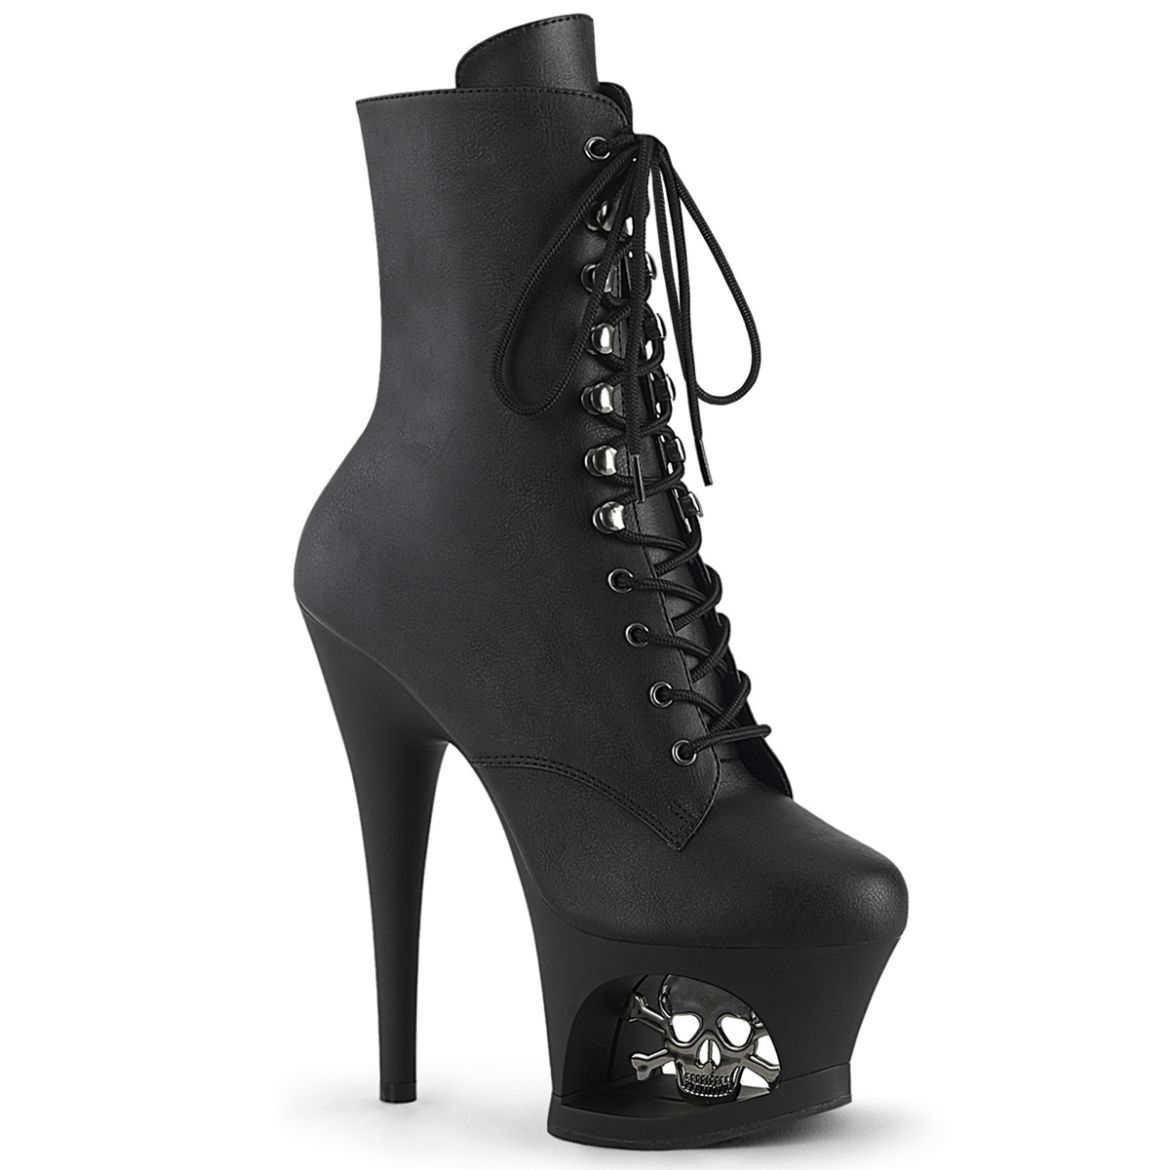 Product image of Pleaser MOON-1020SK Blk Faux Leather/Blk-Pewter 7 Inch Heel 2 3/4 Inch Cut-Out PF Lace-Up Ankle Boot Side Zip